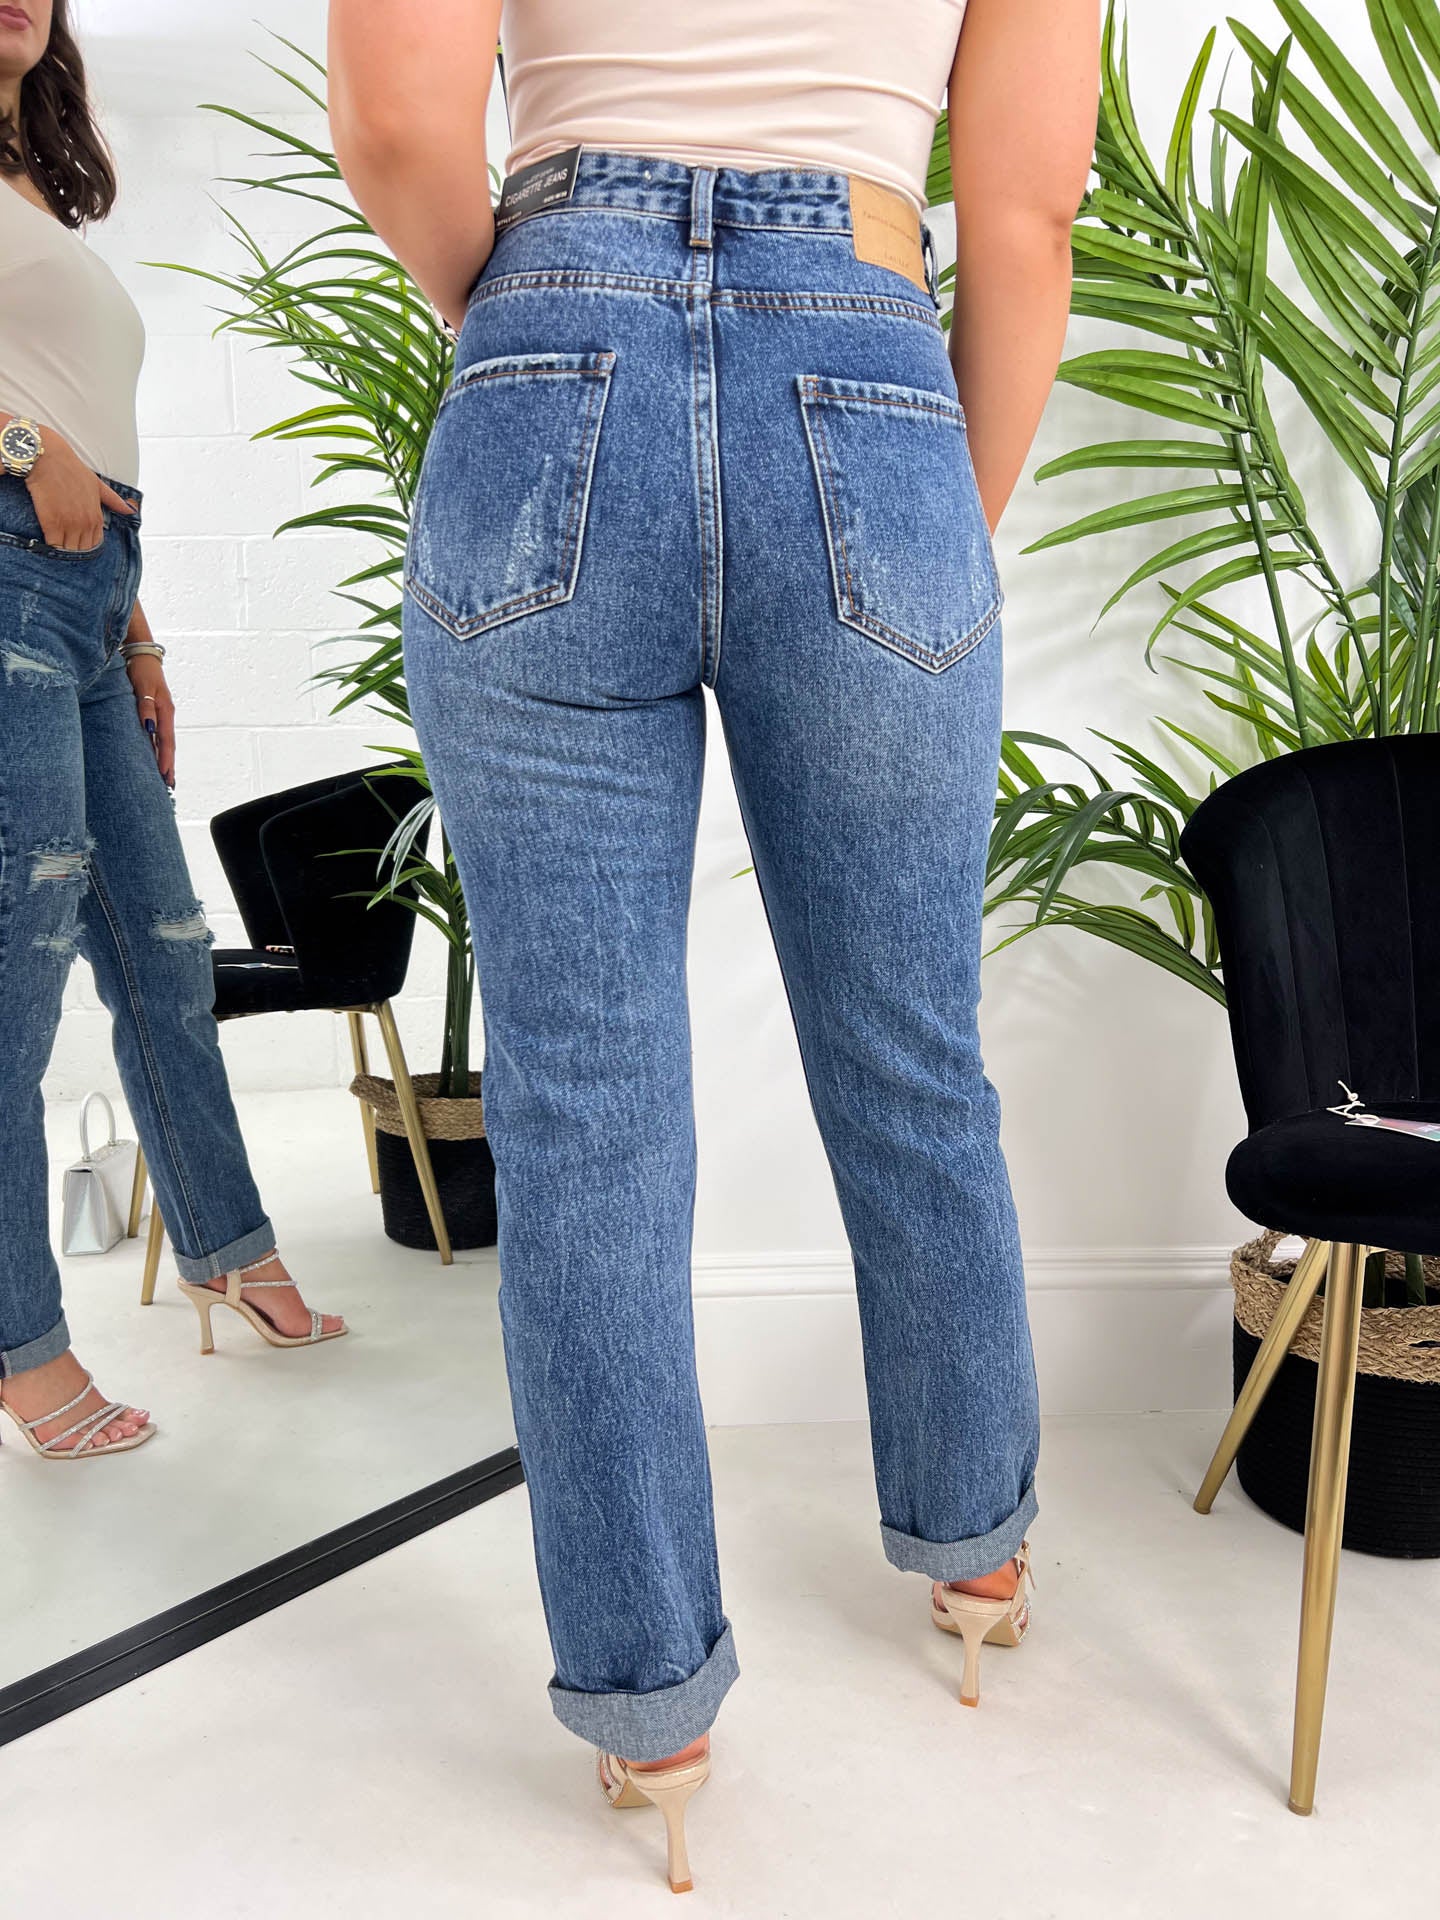 The Madeline - Ripped Cigarette Jeans